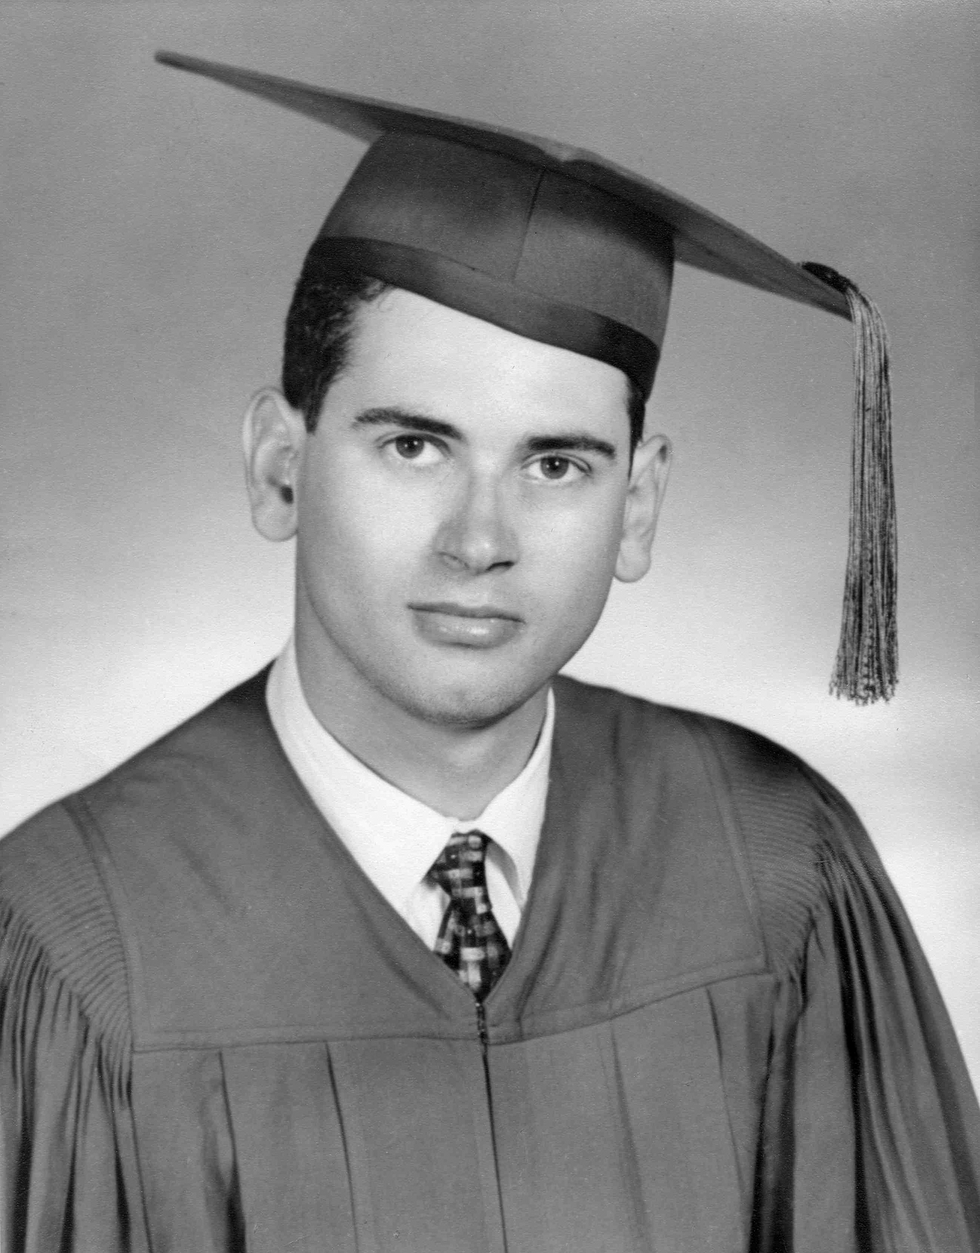 A black and white graduation portrait of a man in a cap and gown.